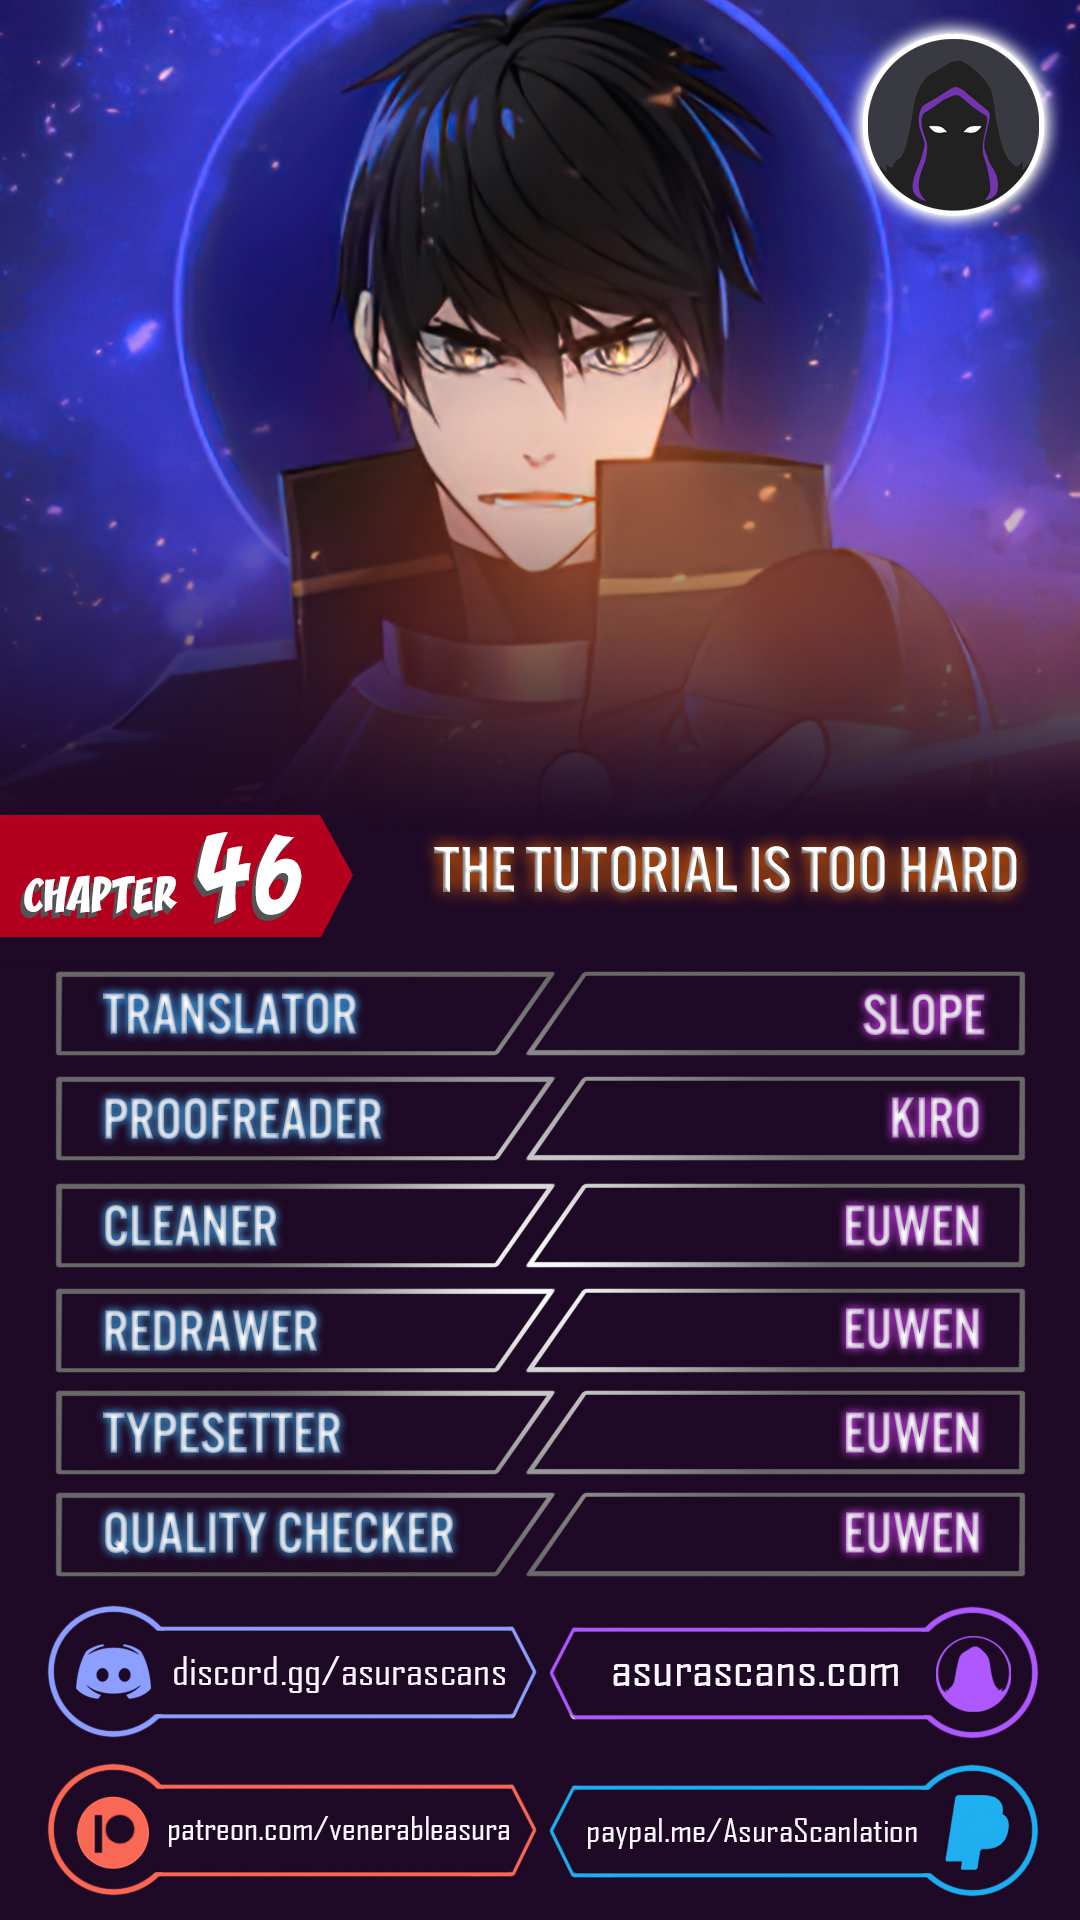 The Tutorial is Too Hard chapter 46